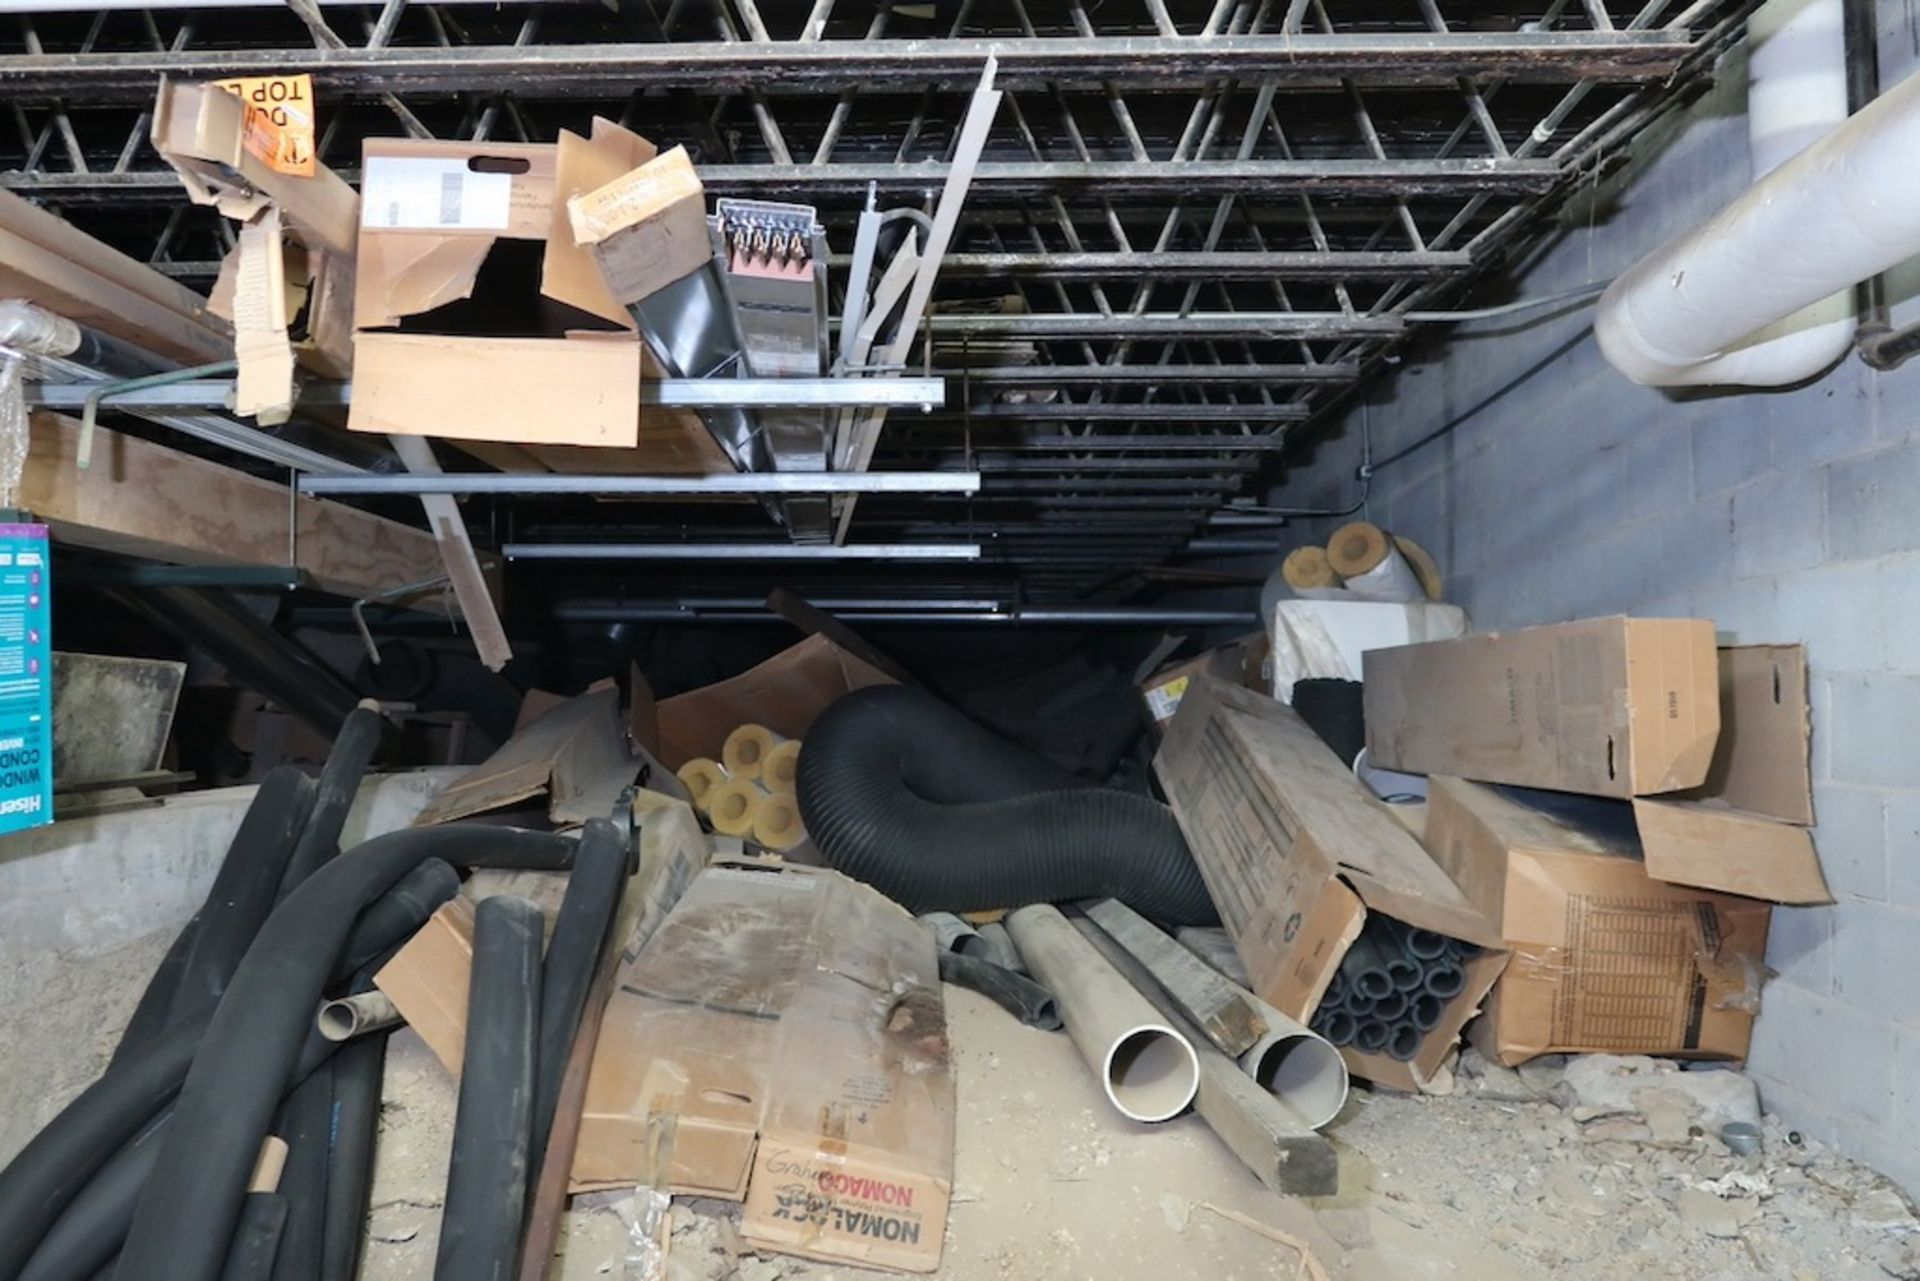 Remaining Contents of Under-Ramp Storage Room, Including Conveyor Parts and Rollers, Etc. - Image 2 of 21